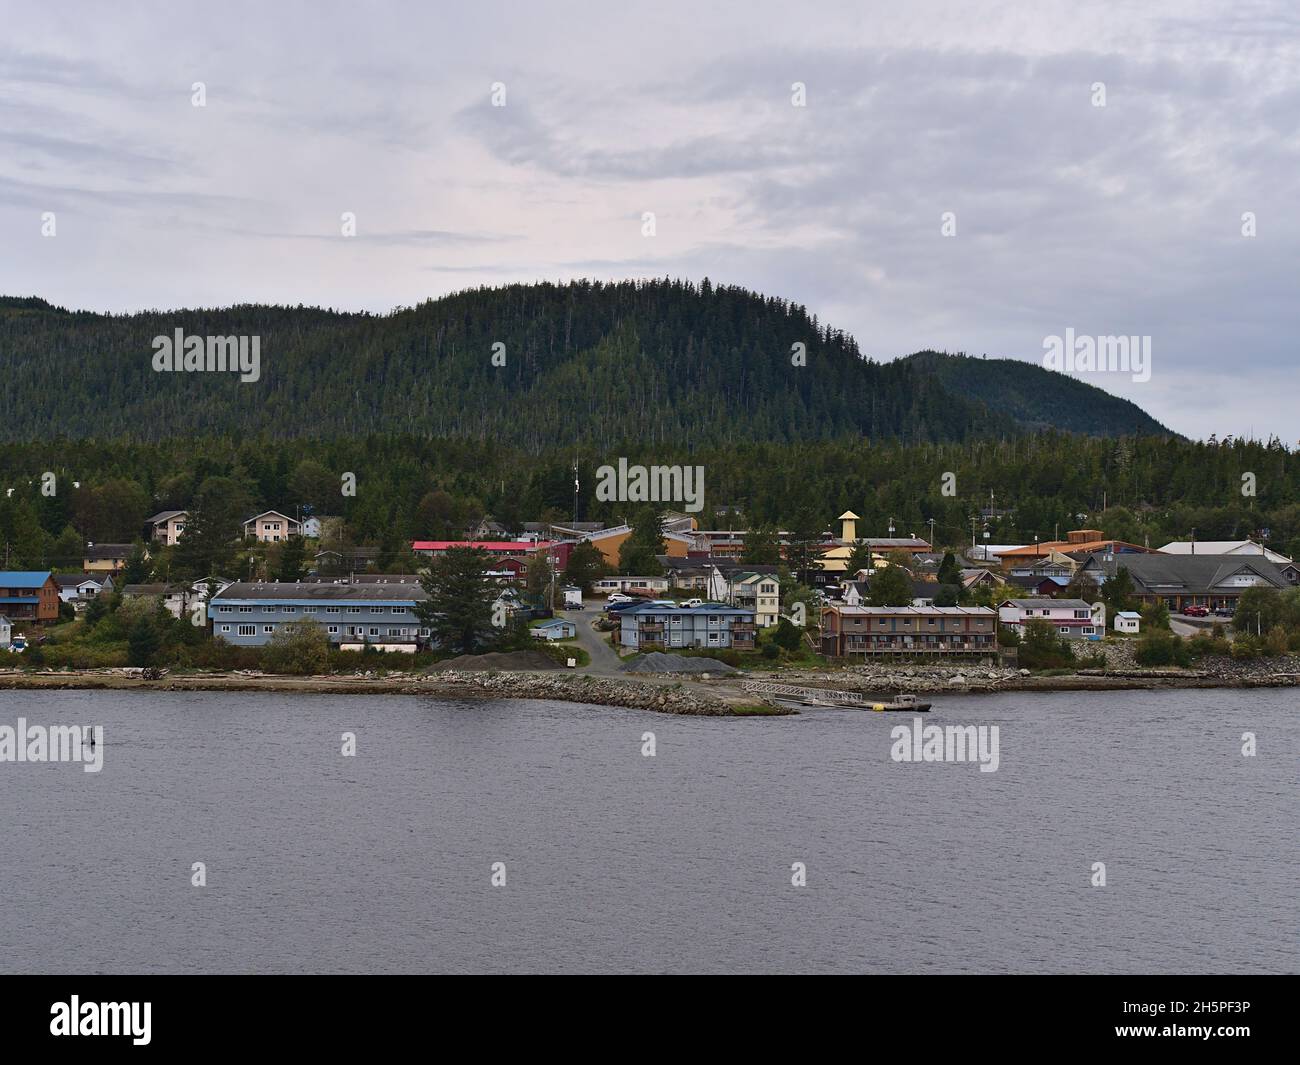 View of small remote village Bella Bella, part of Indian Reservation of Heiltsuk First Nation, on Campbell Island on the Lama Passage, BC, Canada. Stock Photo